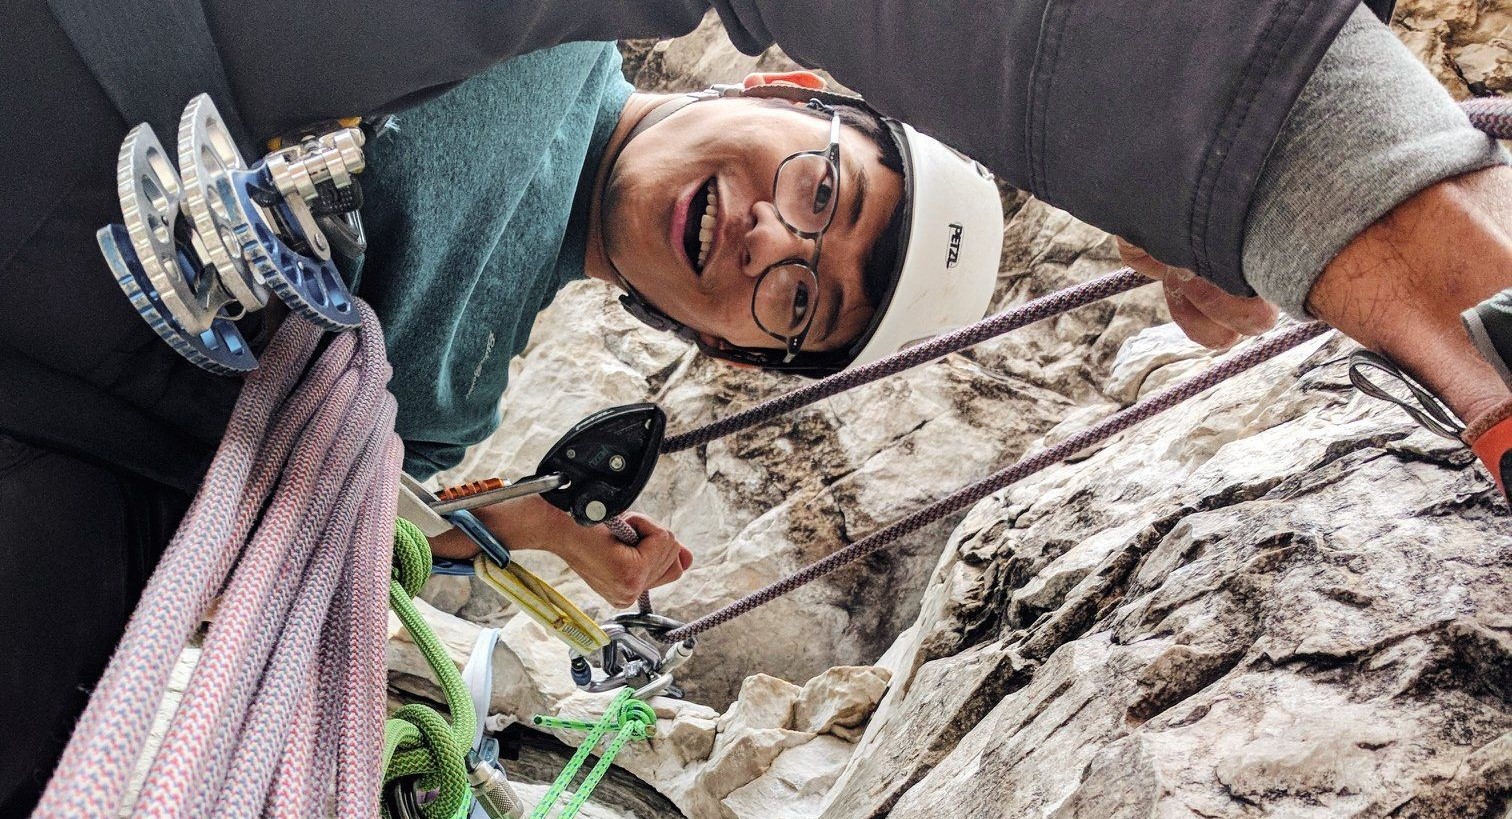 Me looking down while rock climbing with a bunch of rope and gear around